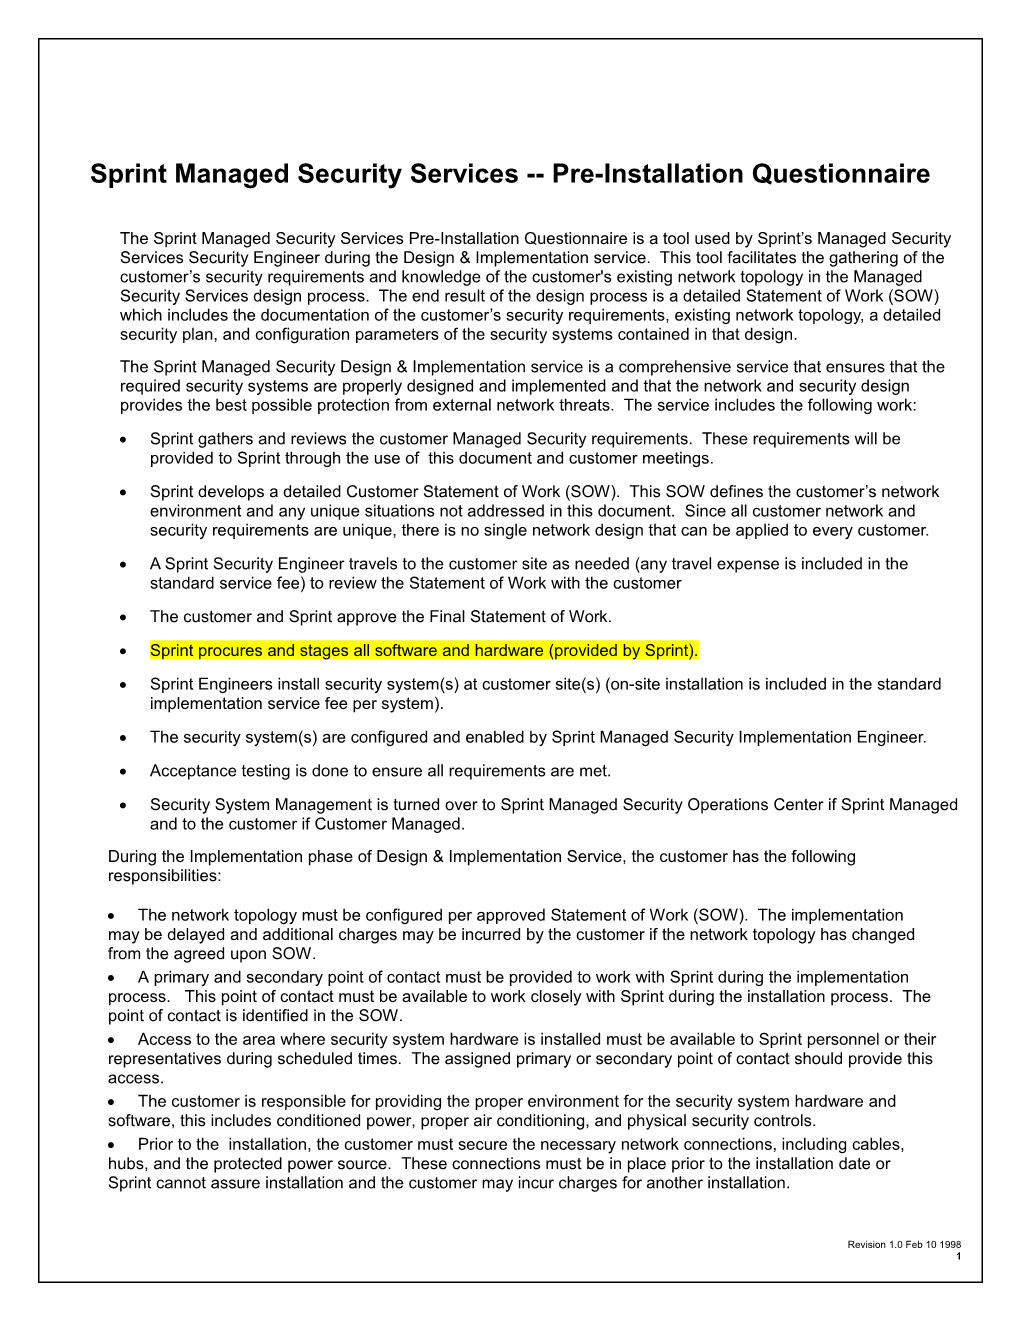 Sprint Managed Security Services Pre-Installation Questionnaire